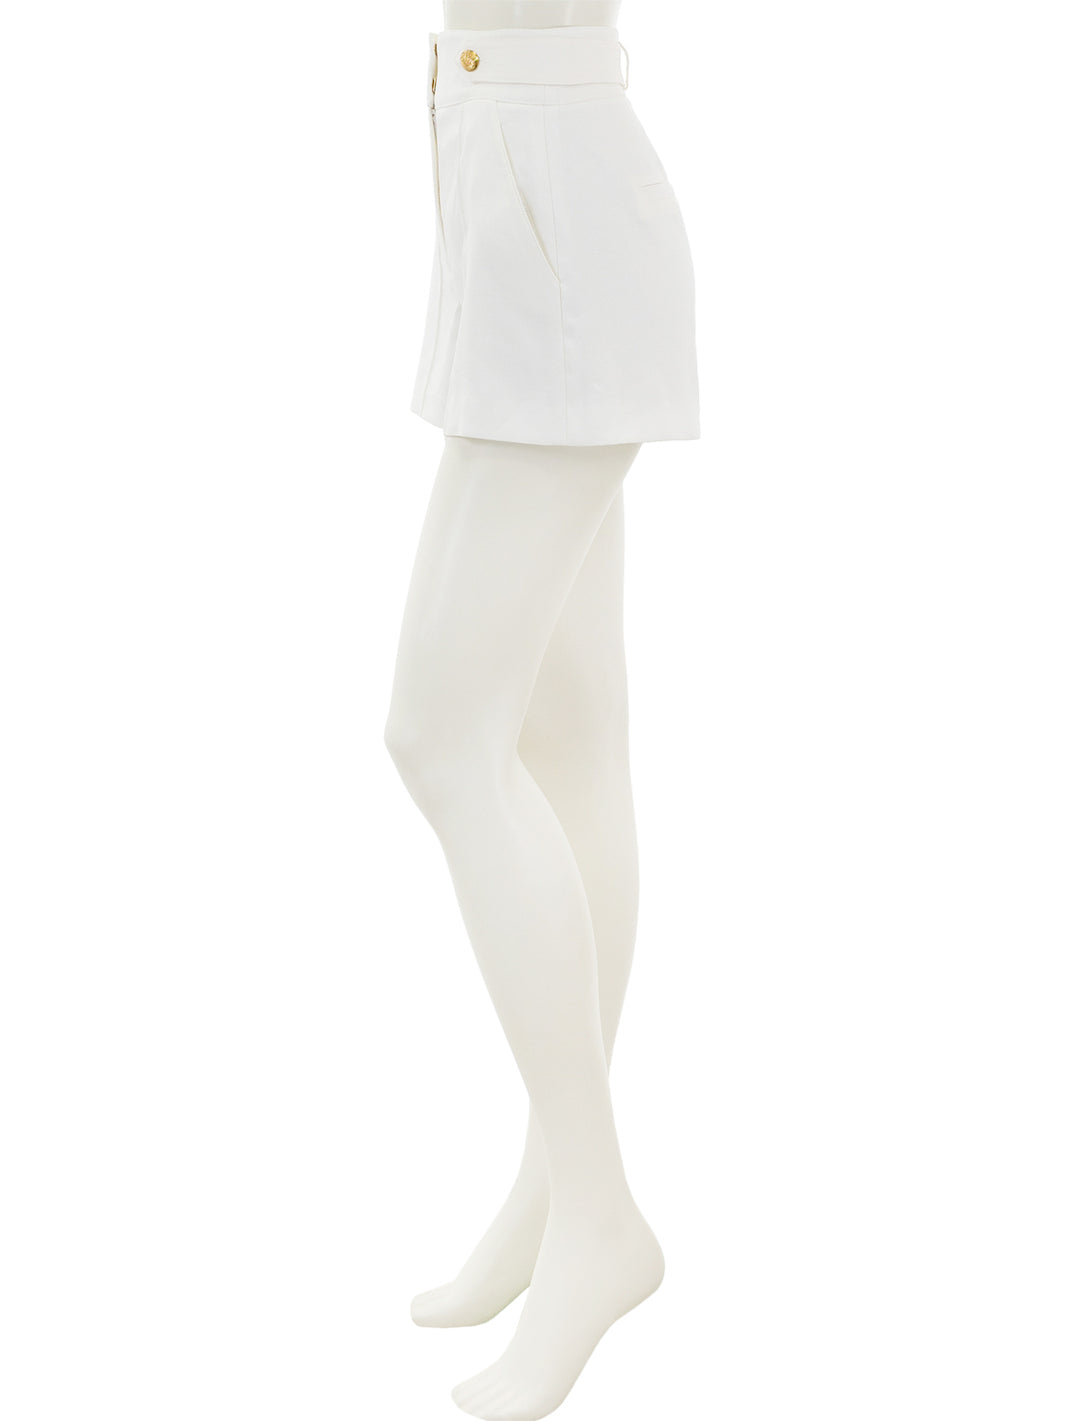 Side view of Veronica Beard's runo shorts in white.